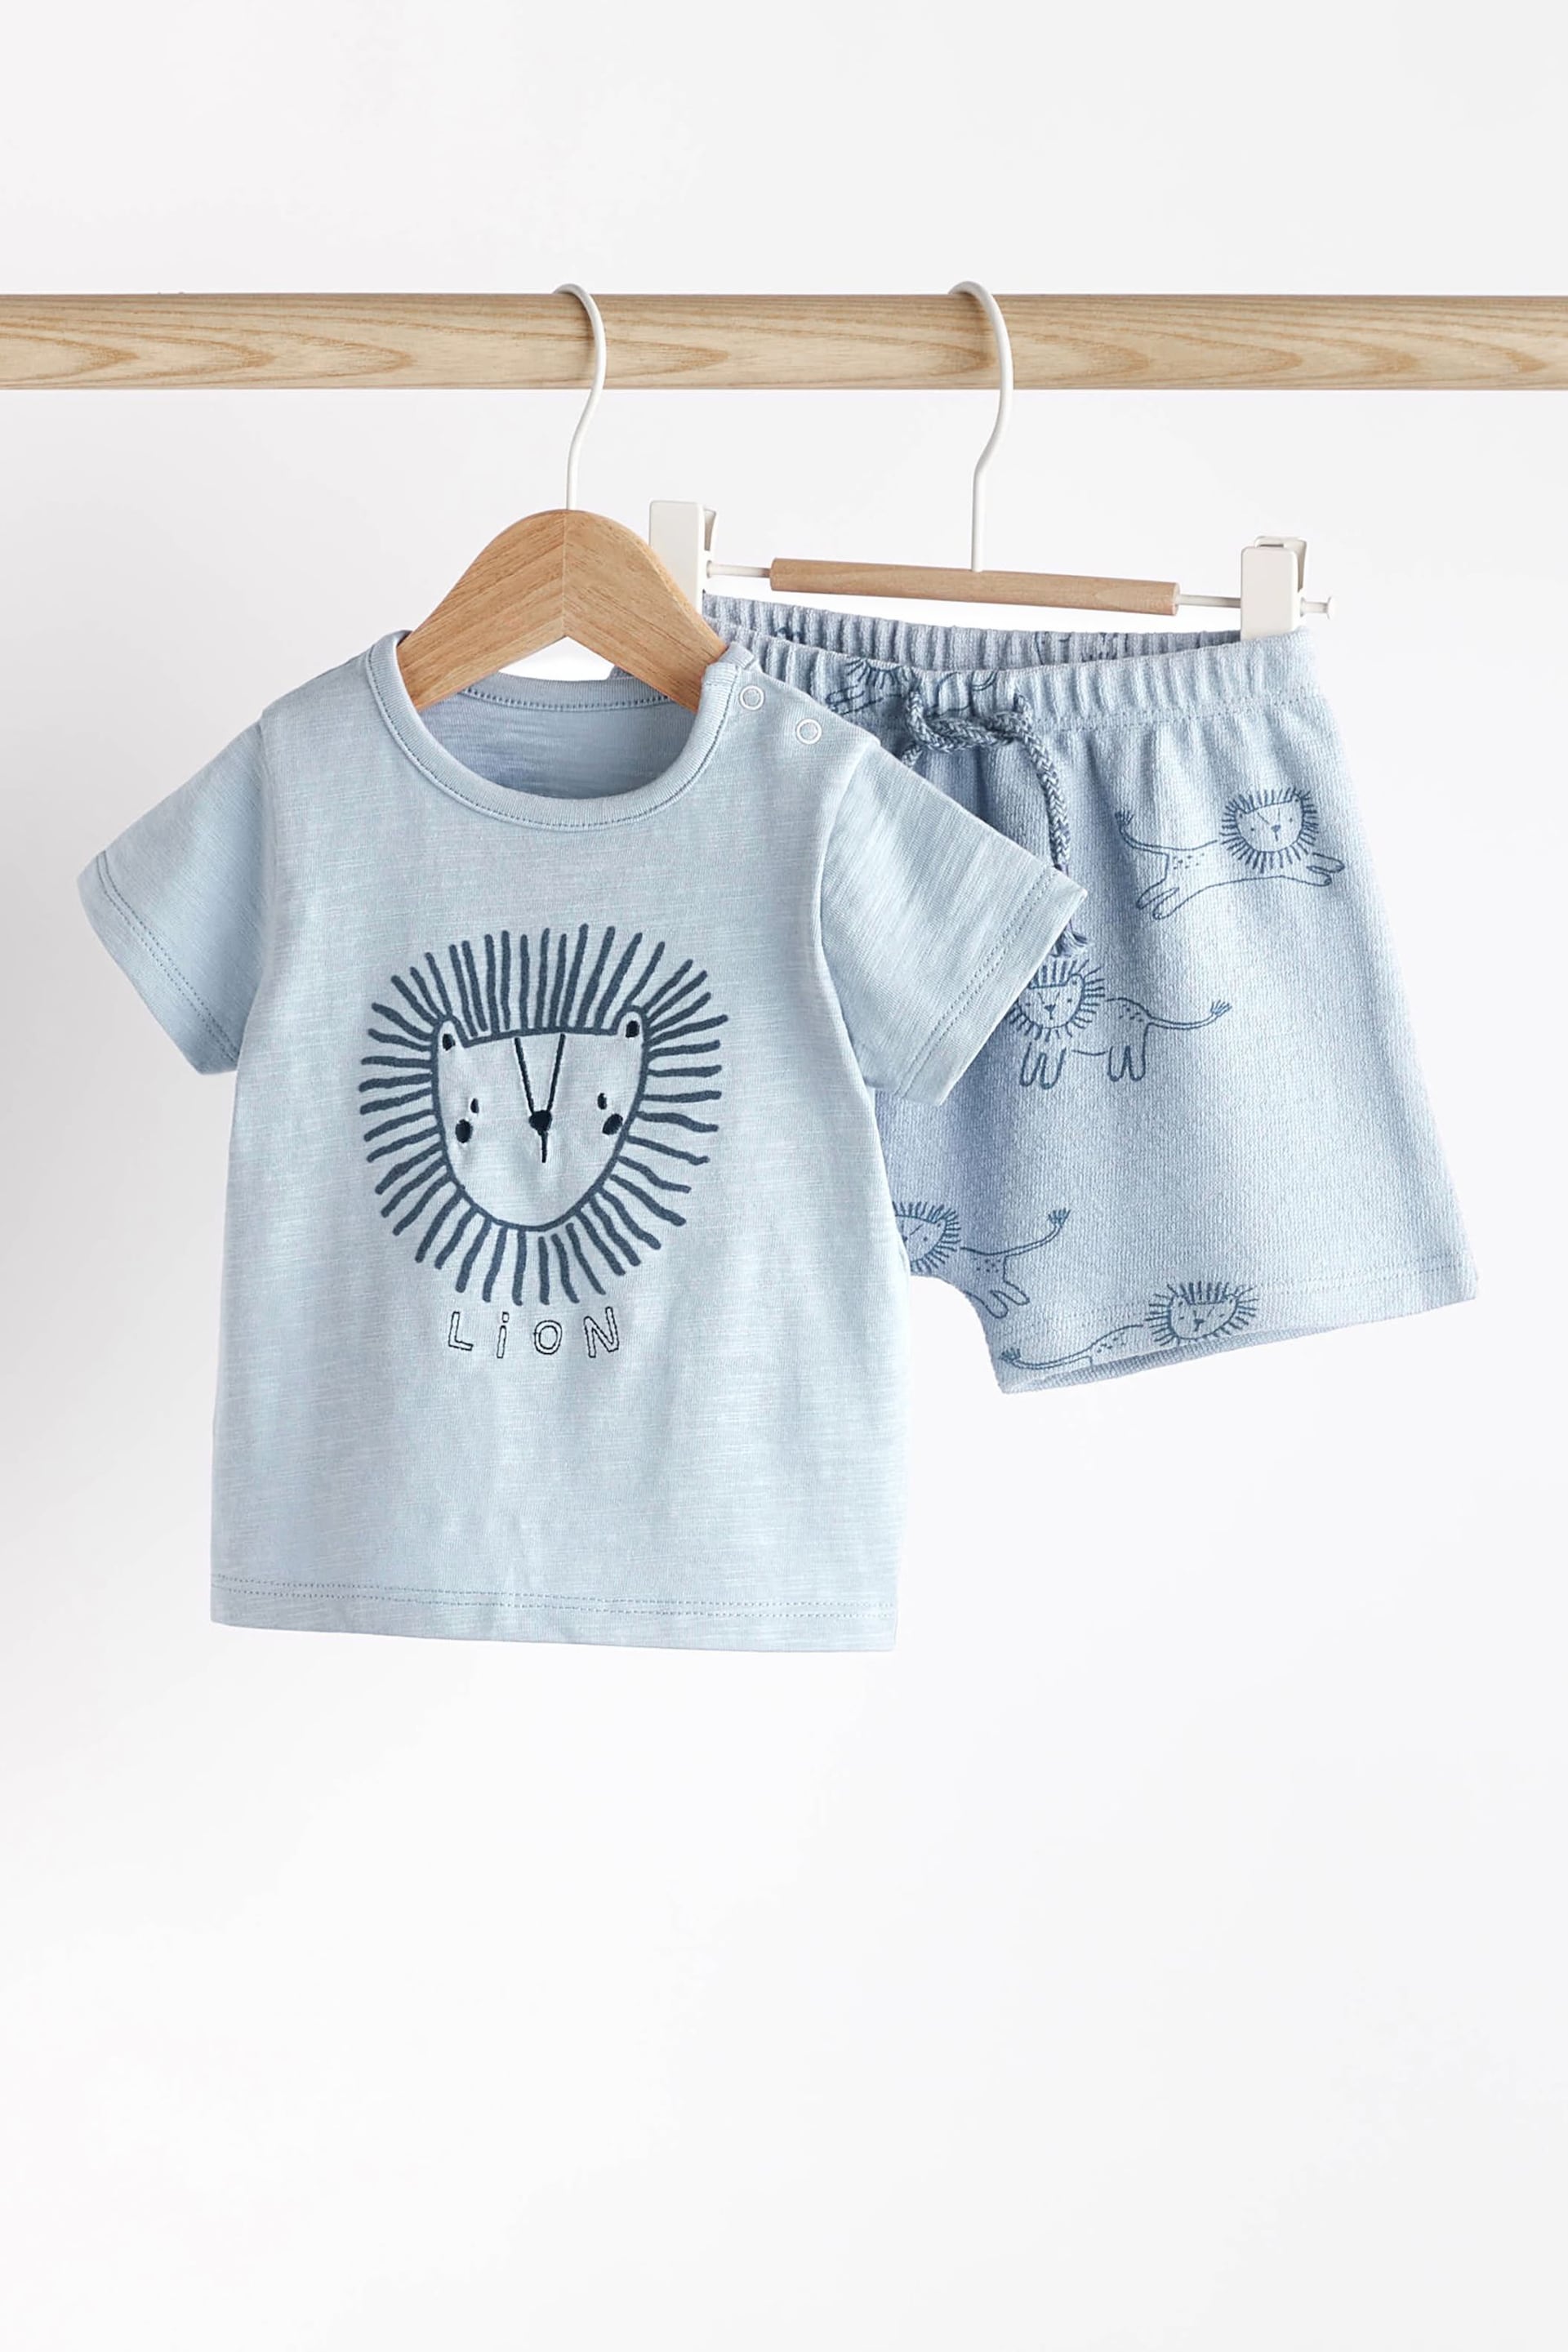 Teal Blue Lion Baby T-Shirt And Shorts 2 Piece Set - Image 1 of 13